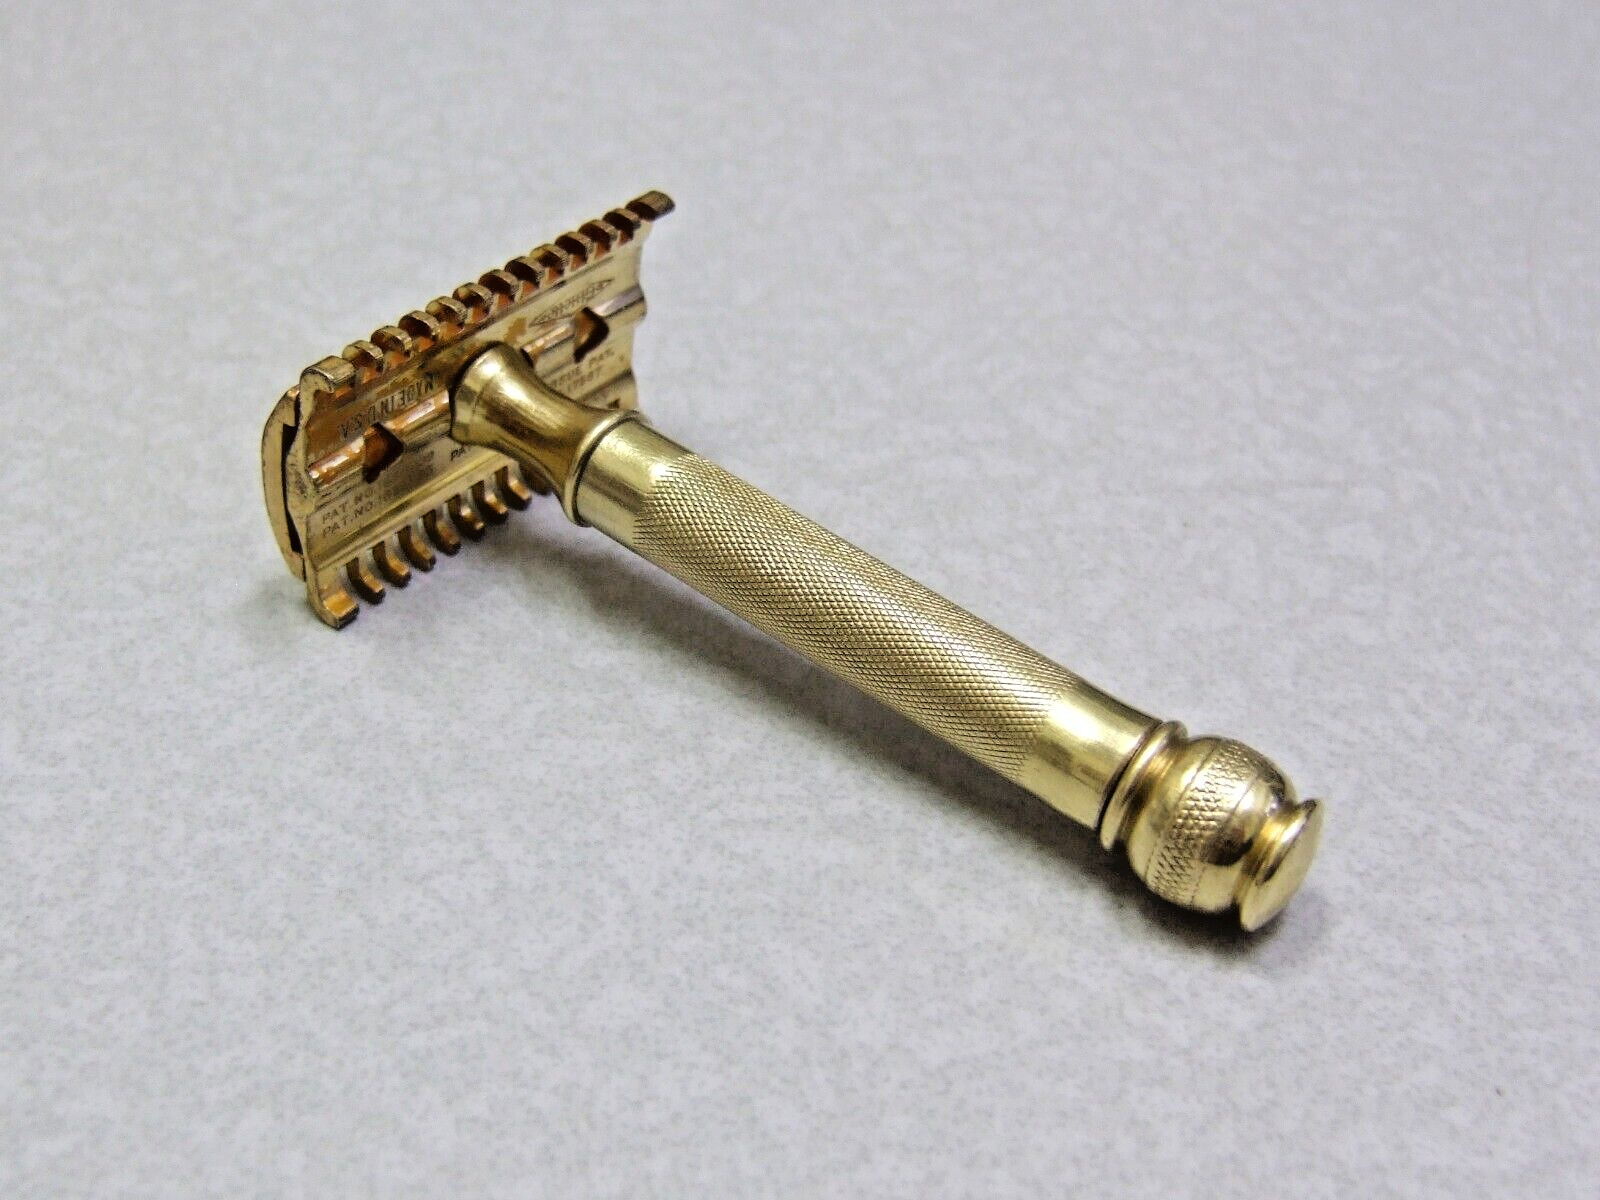 Vintage 1930'S Gillette Goodwill Double Edge Safety Razor - Clean